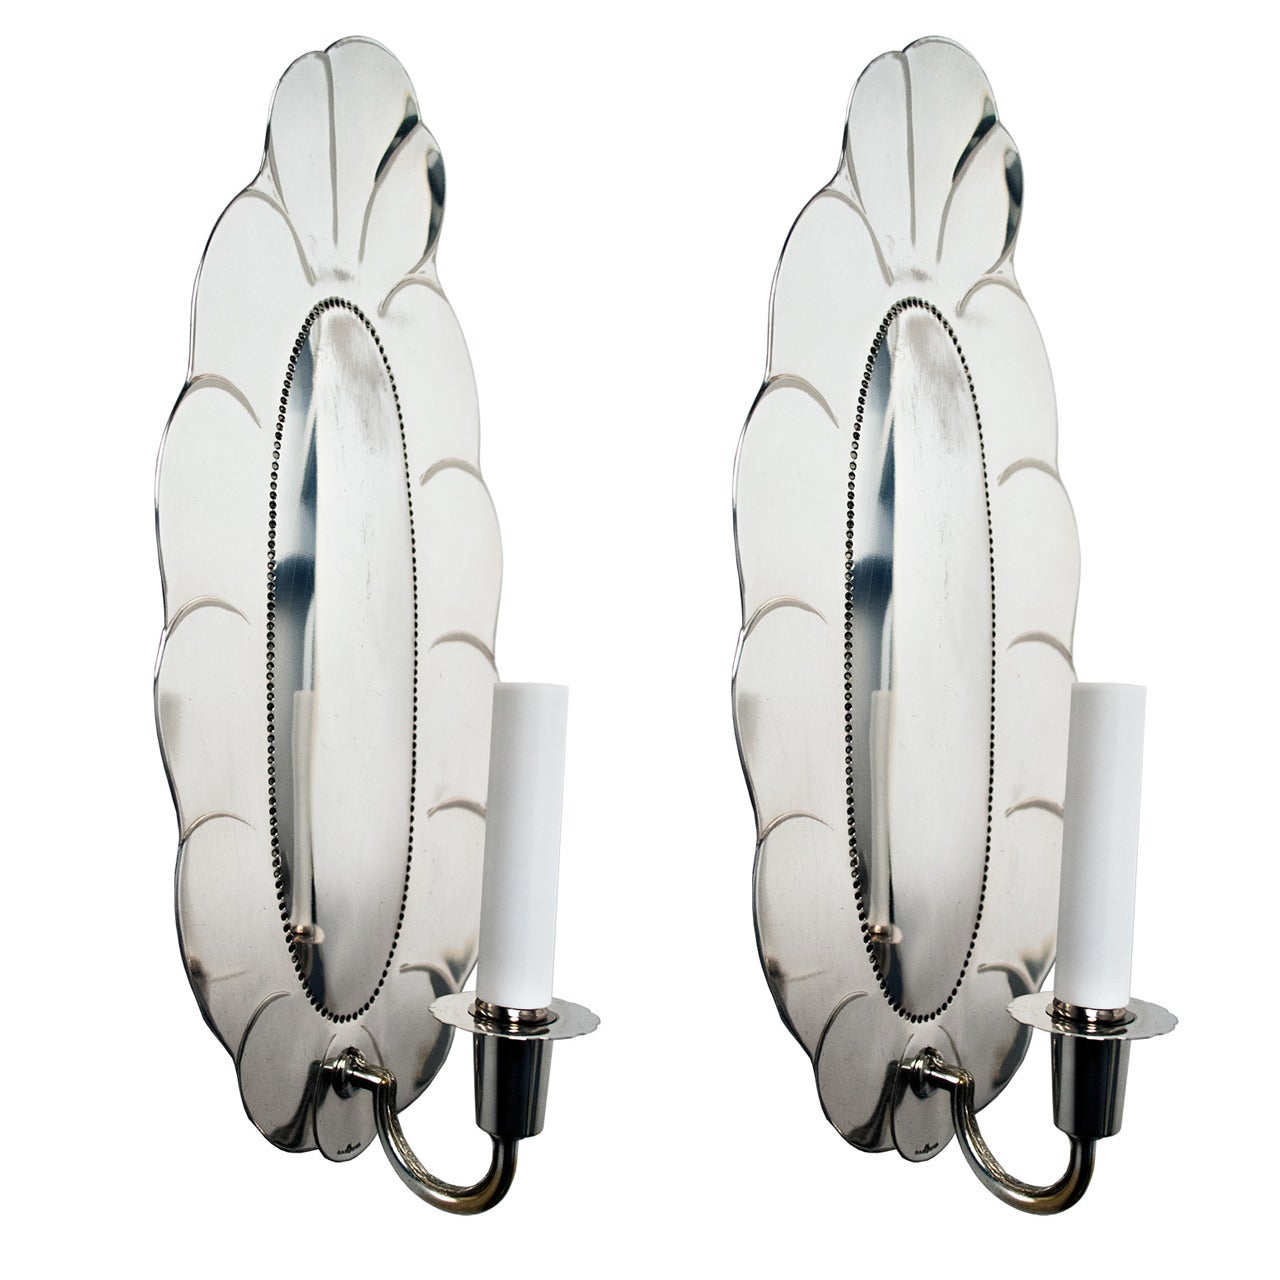 Pair of Swedish Art Deco Silver Plated Sconces by Jacob Angman for GAB